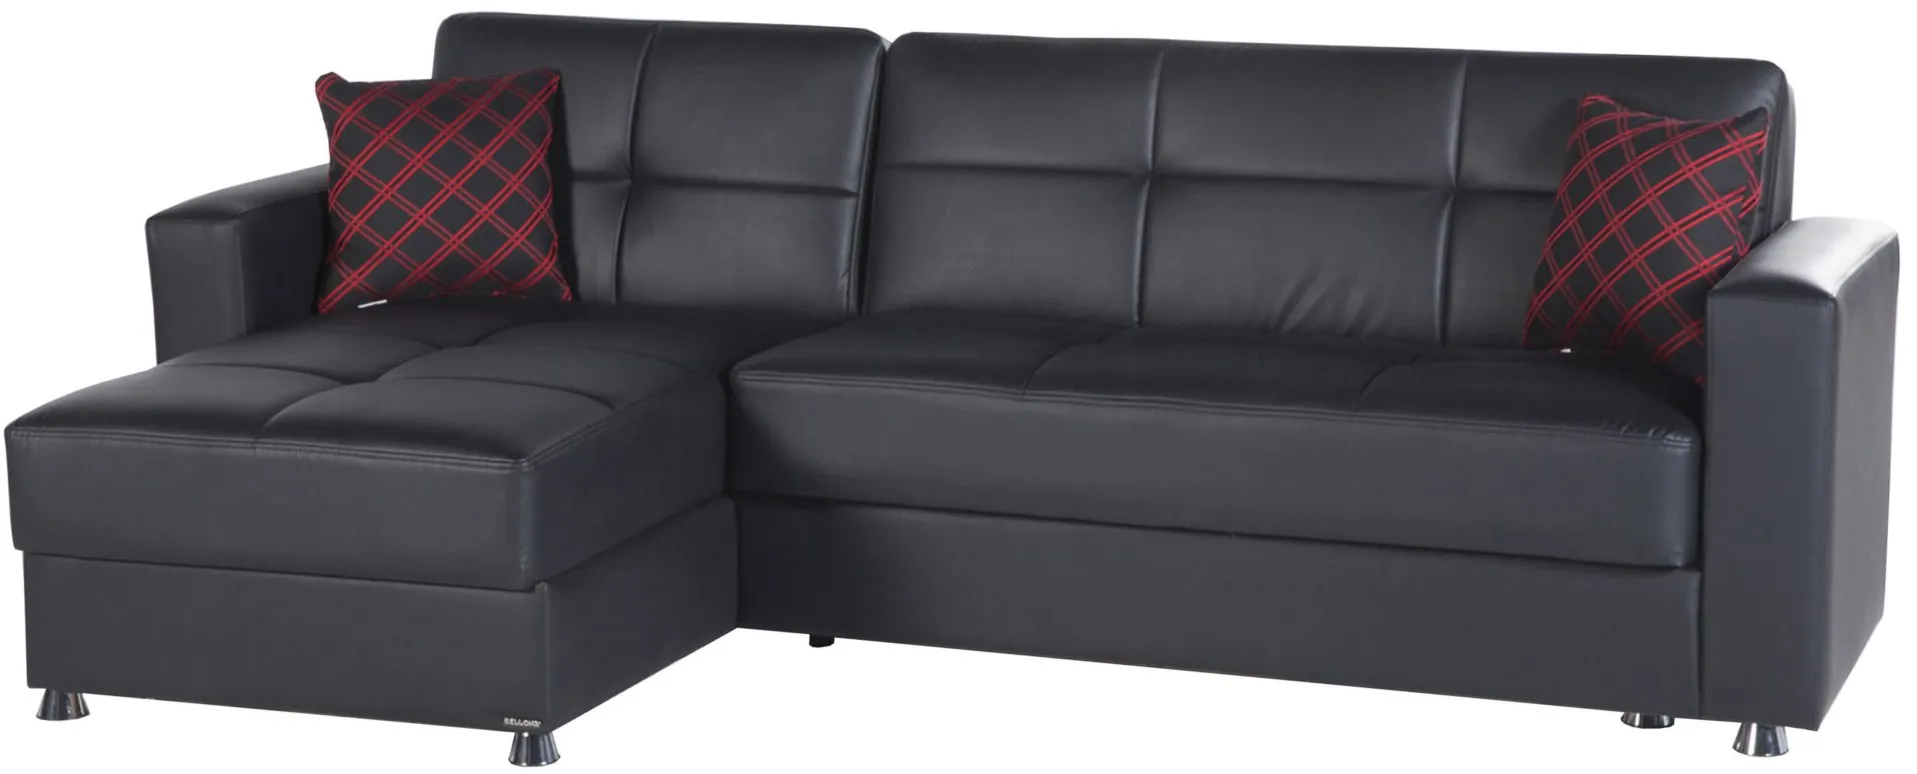 Aracely 2-pc. Reversible Sectional Sofa in Black by HUDSON GLOBAL MARKETING USA